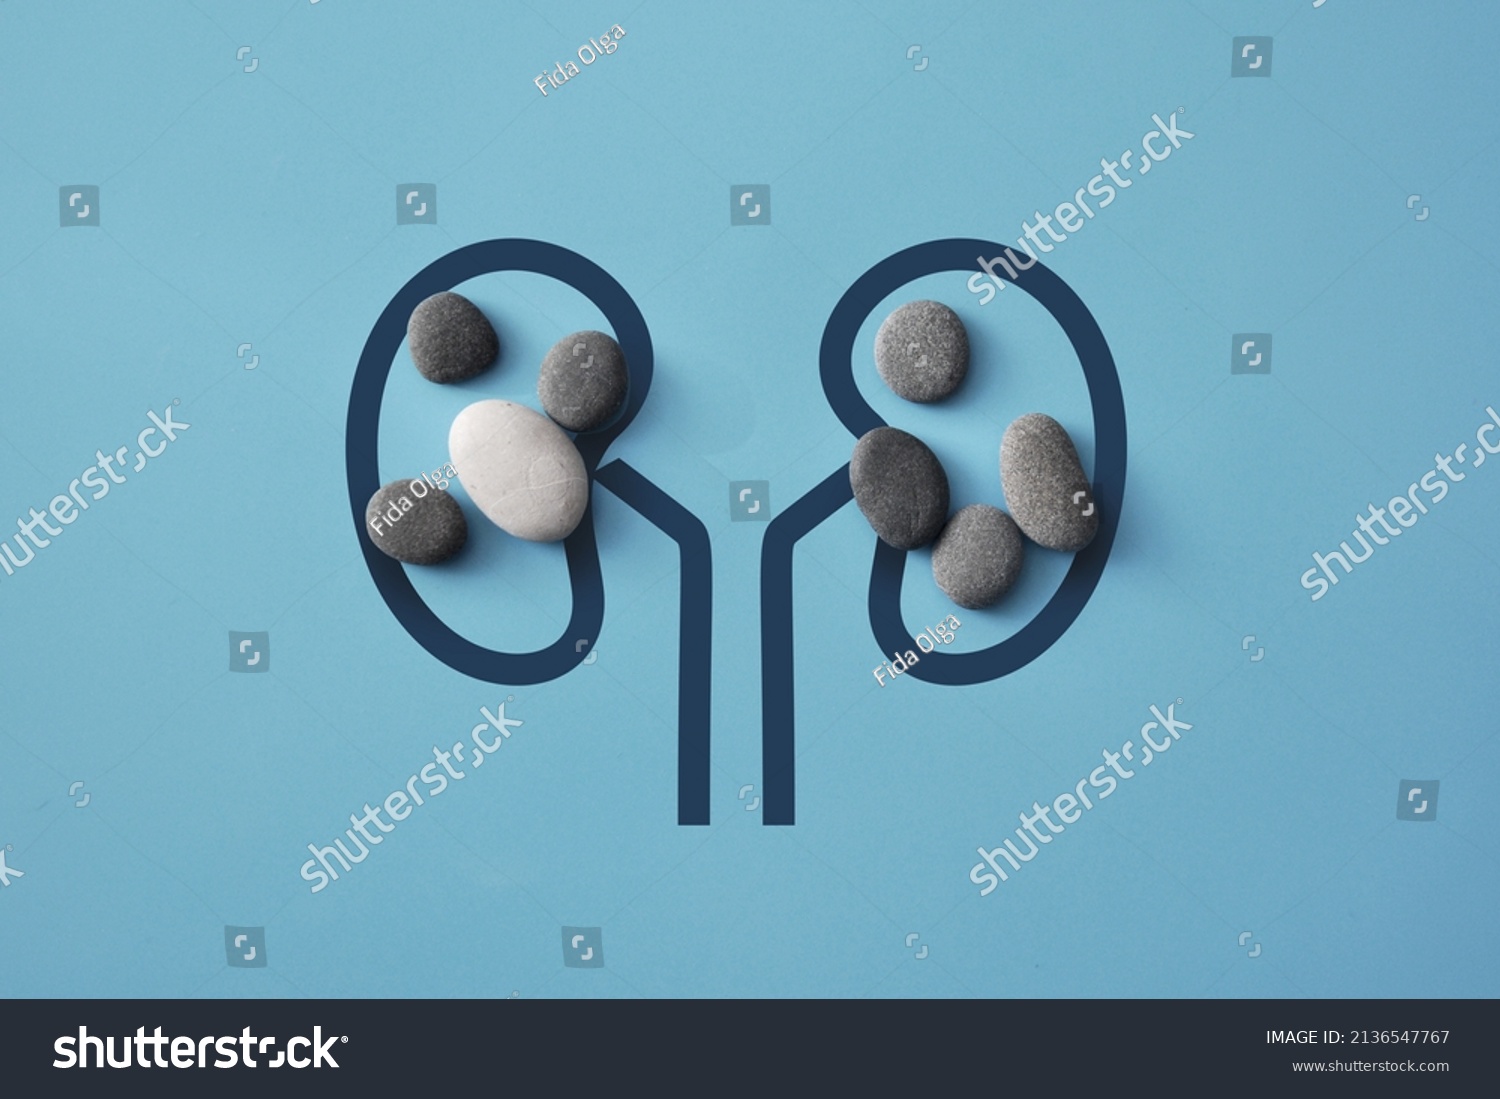 Stones on the silhouette of the kidneys. A symbol of kidney disease. Kidney stones #2136547767